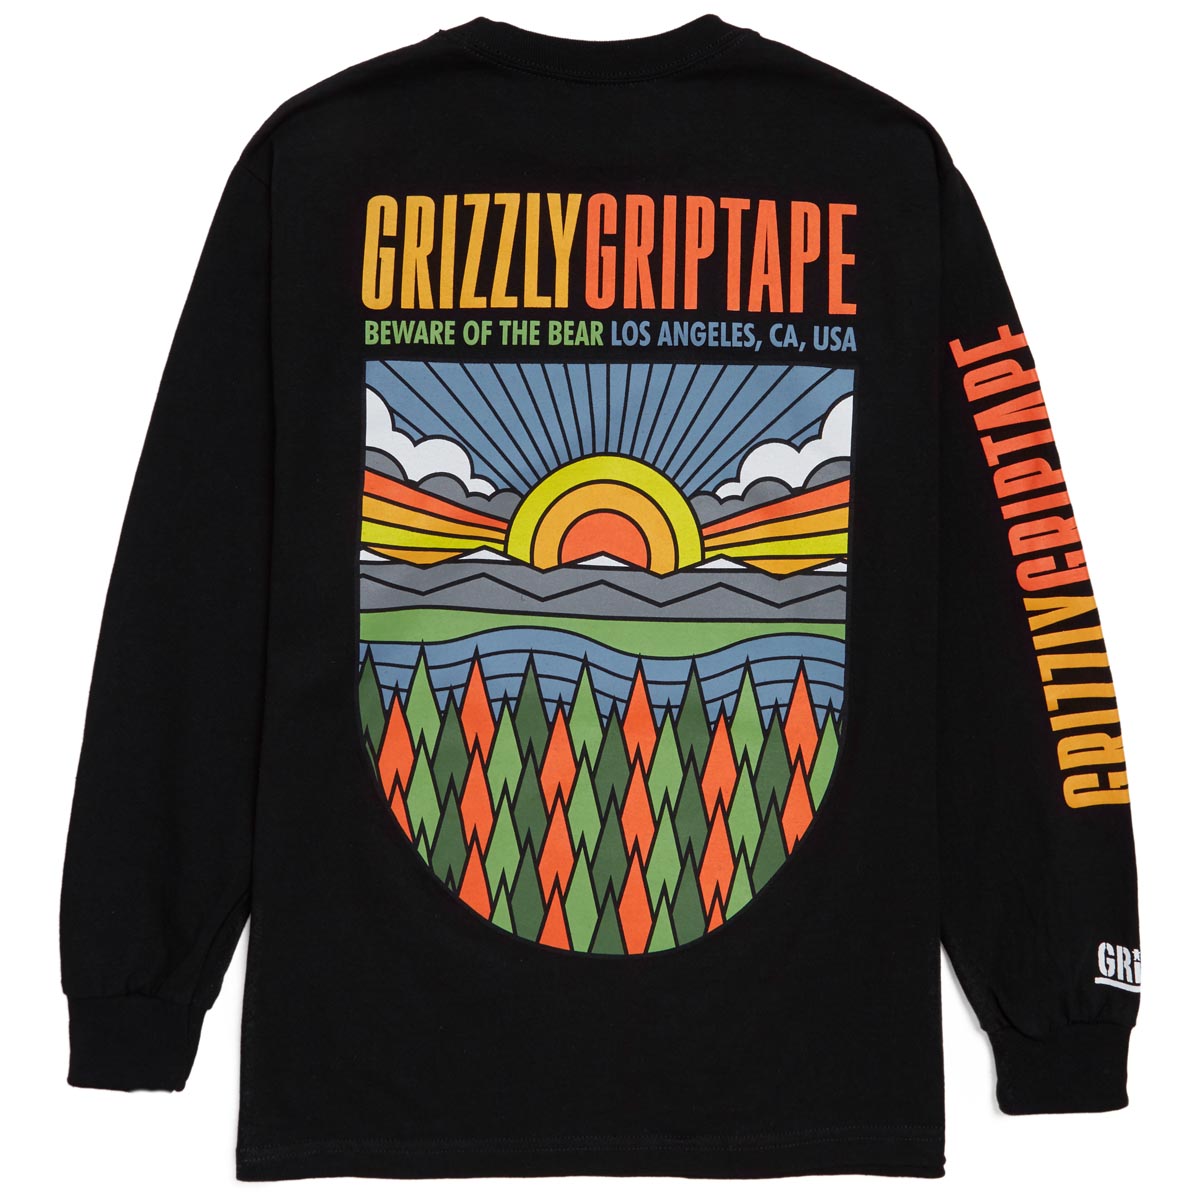 Grizzly Sun Valley Long Sleeve T-Shirt - Black image 1